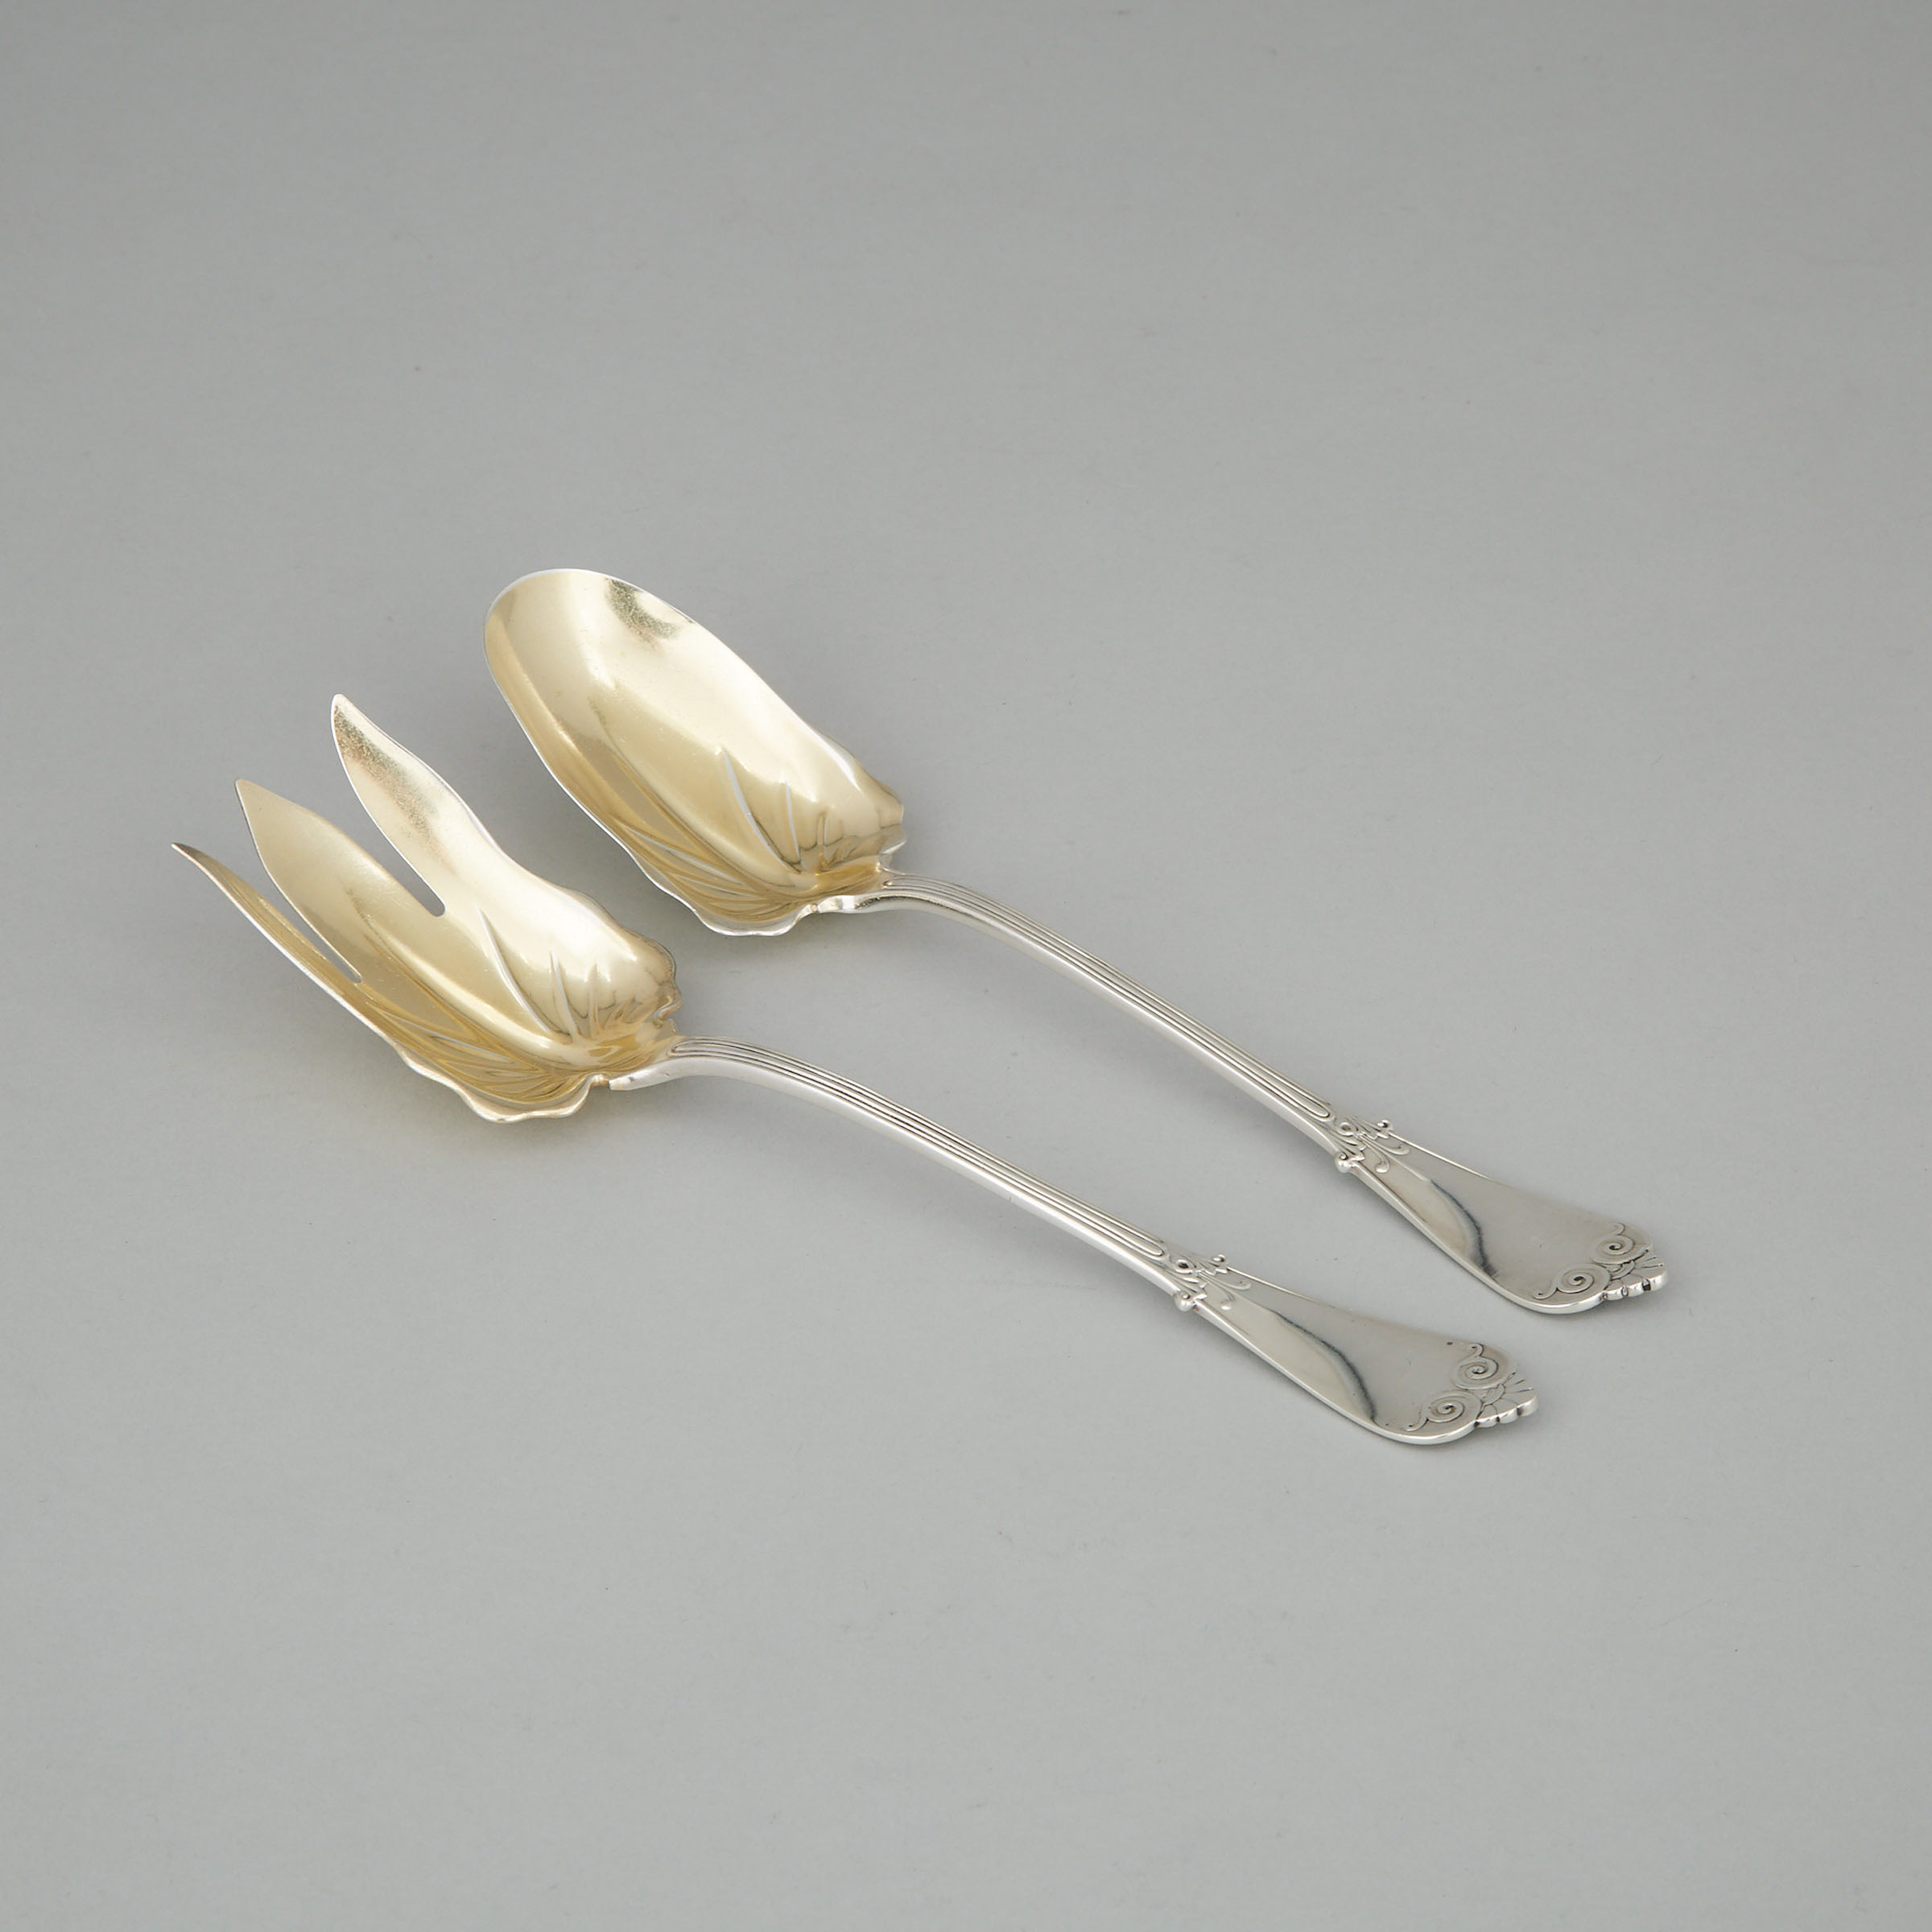 American Silver 'Beekman' Pattern Serving Spoon and Fork, Tiffany & Co., New York, N.Y., 20th century